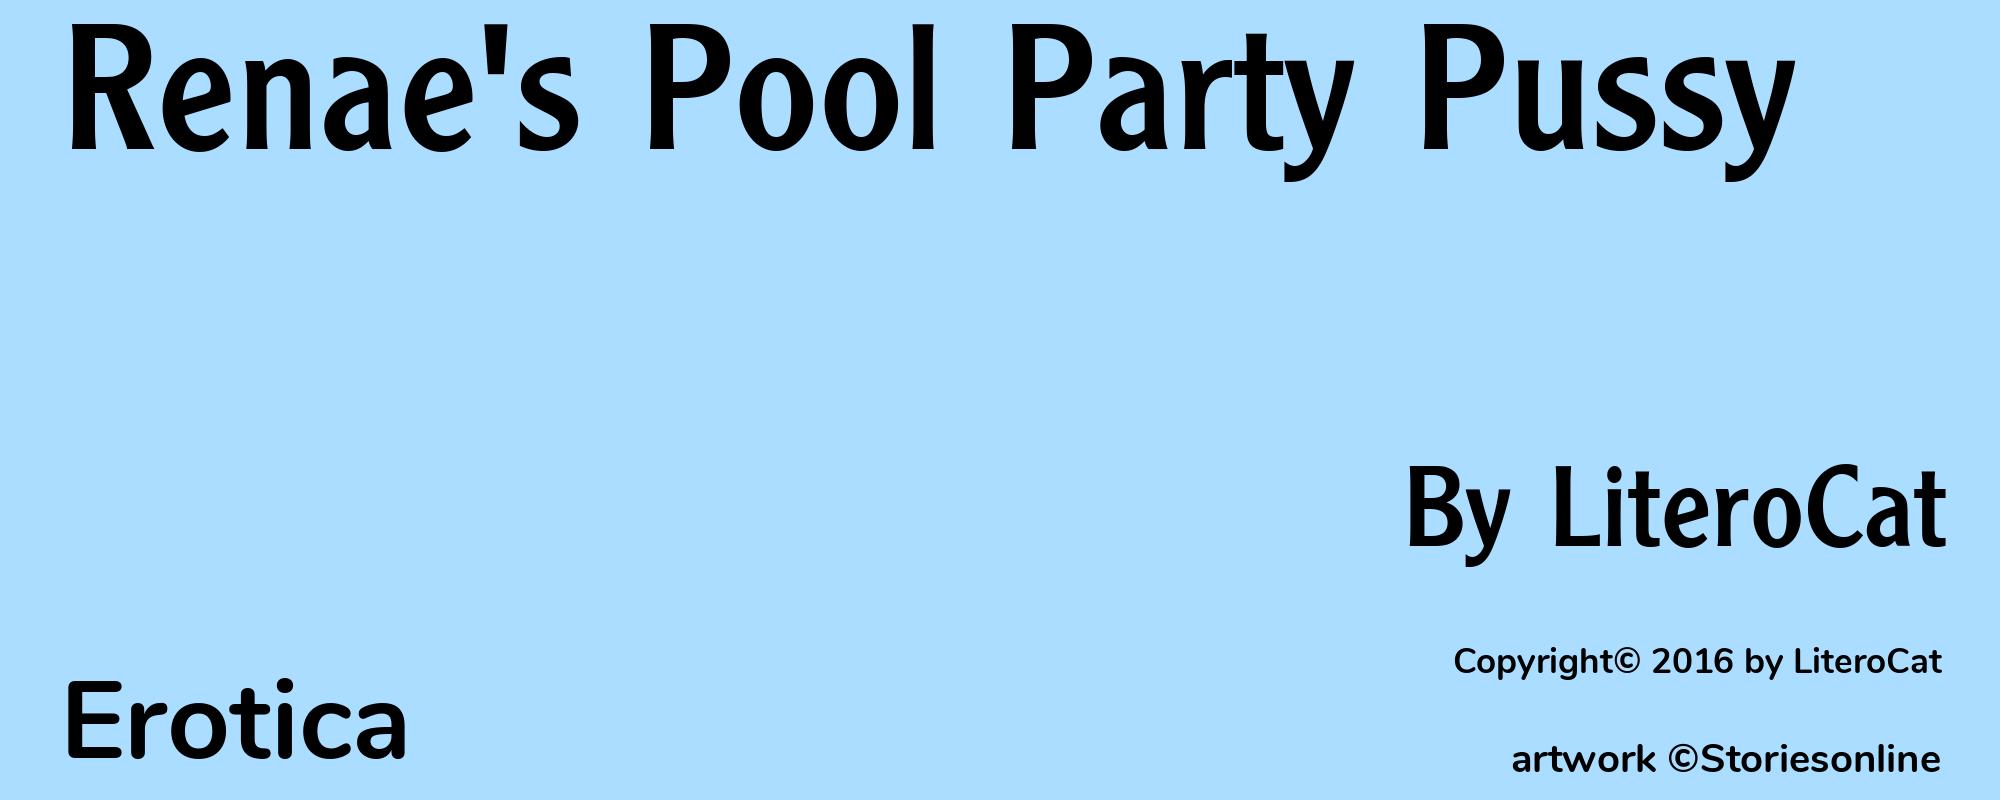 Renae's Pool Party Pussy - Cover